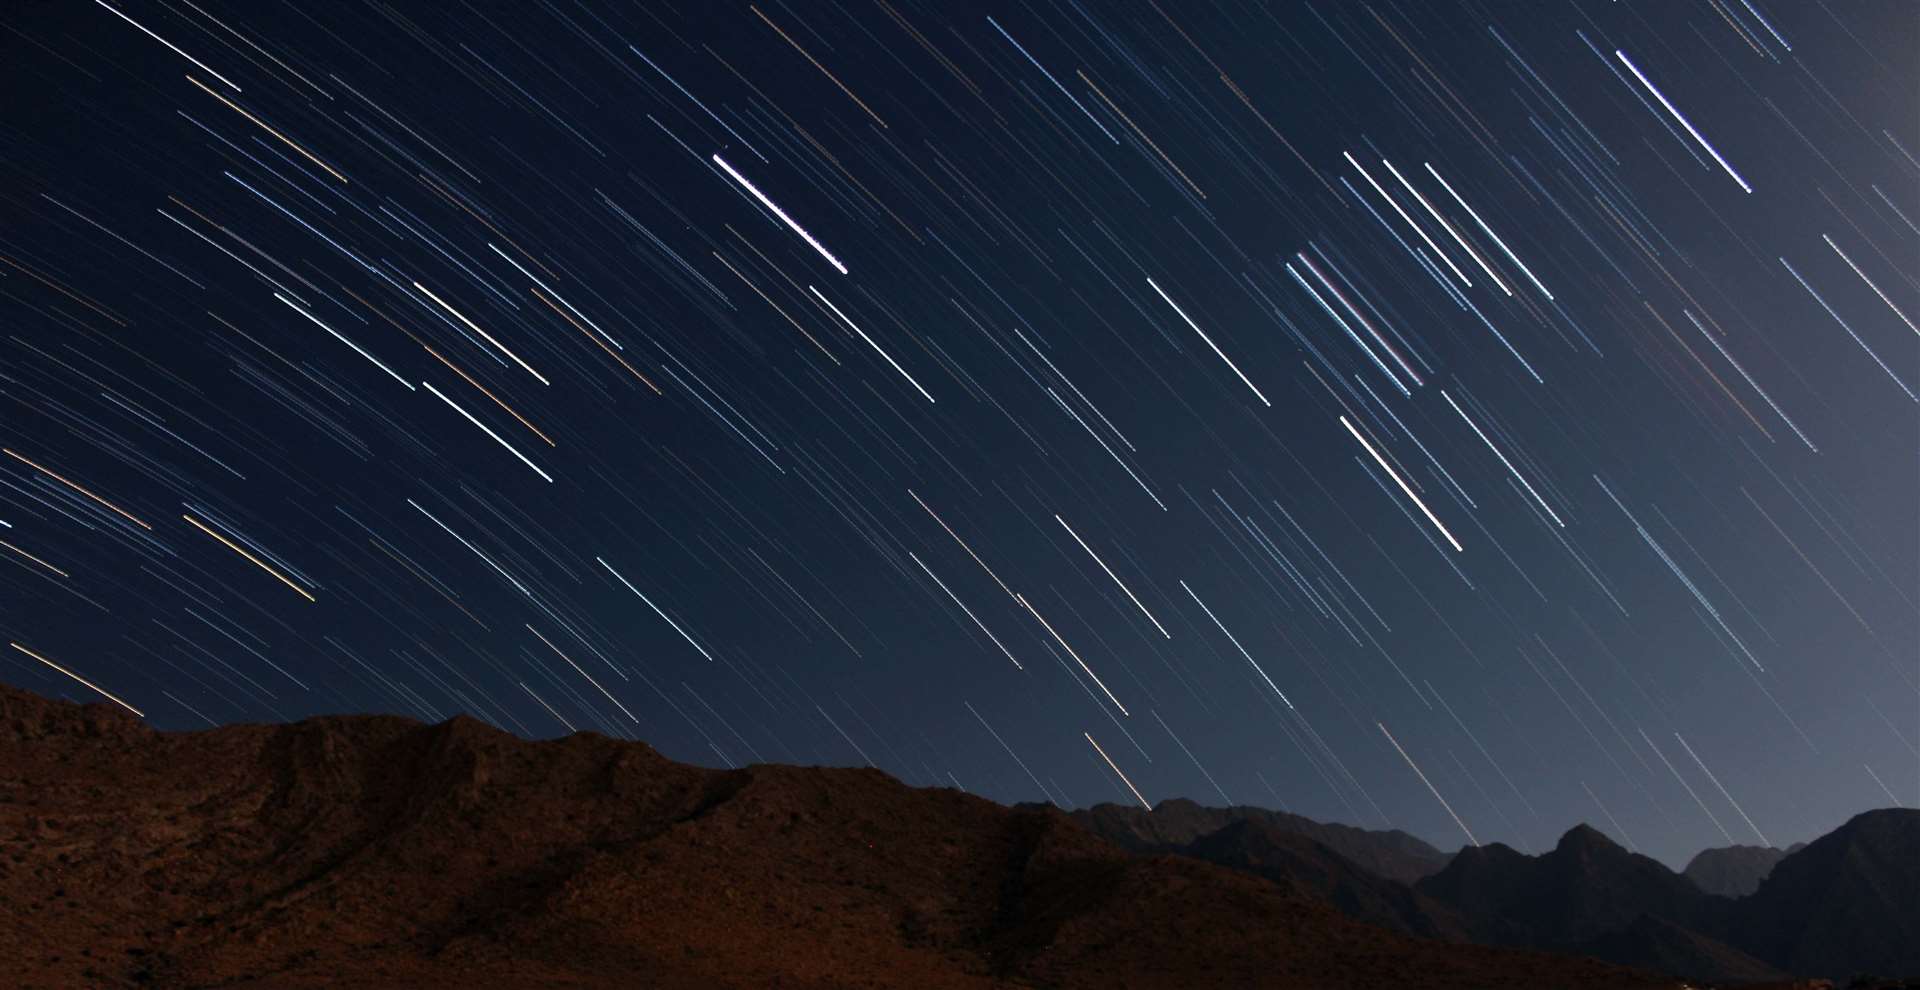 The meteor shower, if conditions are right, might lead to around 50 to 60 meteors an hour Picture: Wirestock/stock.adobe.com